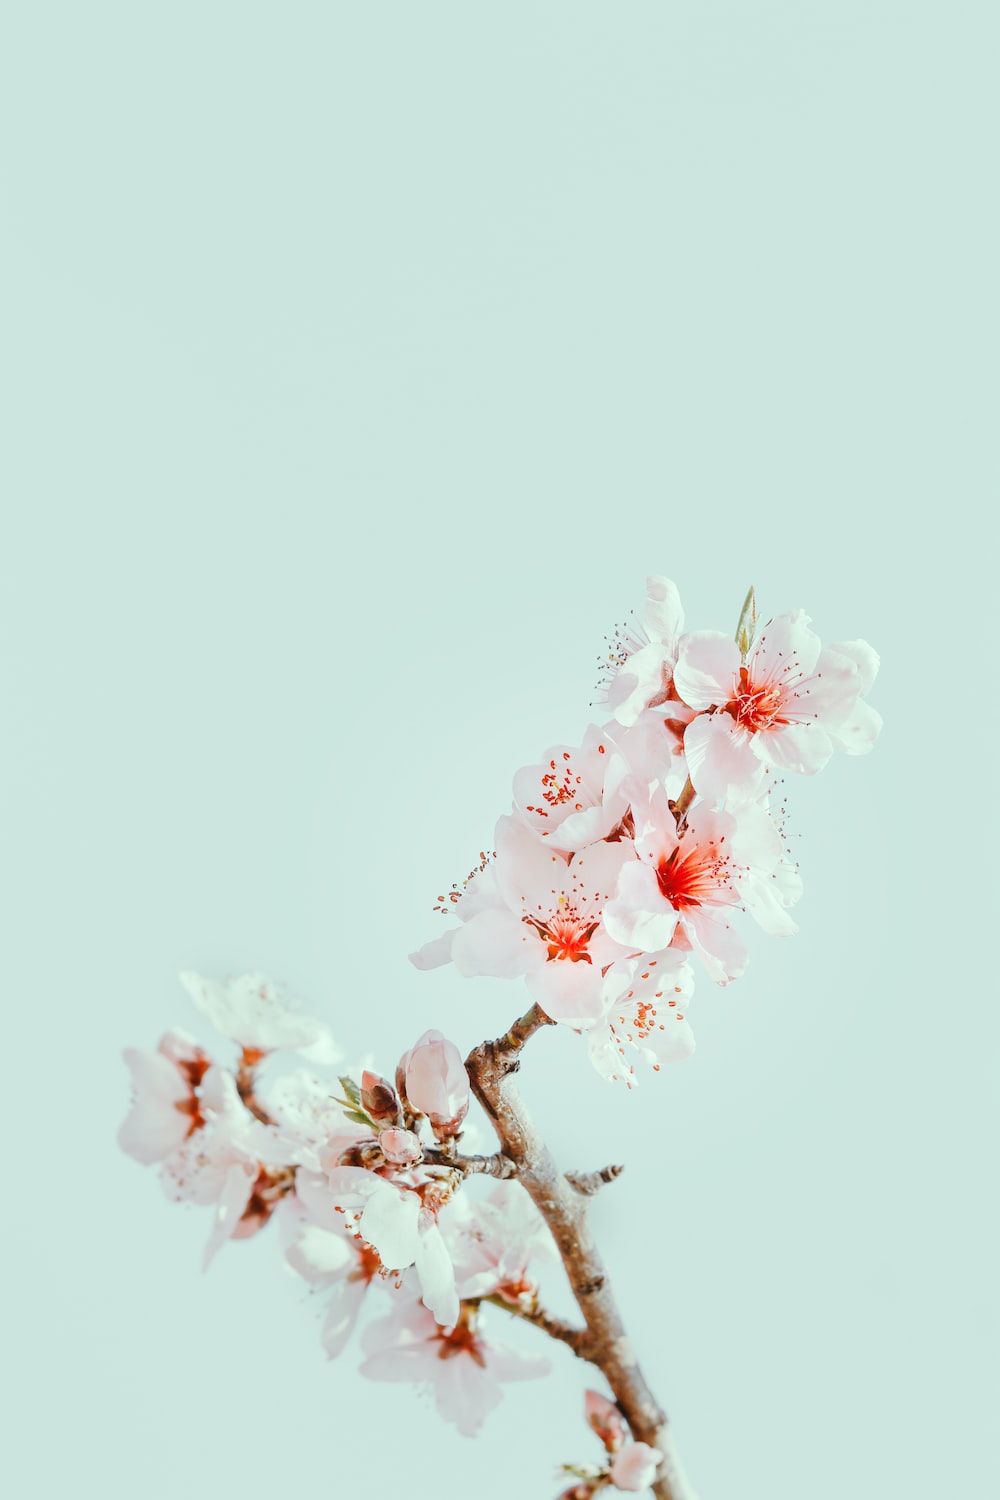 Cherry blossom pictures download free images on